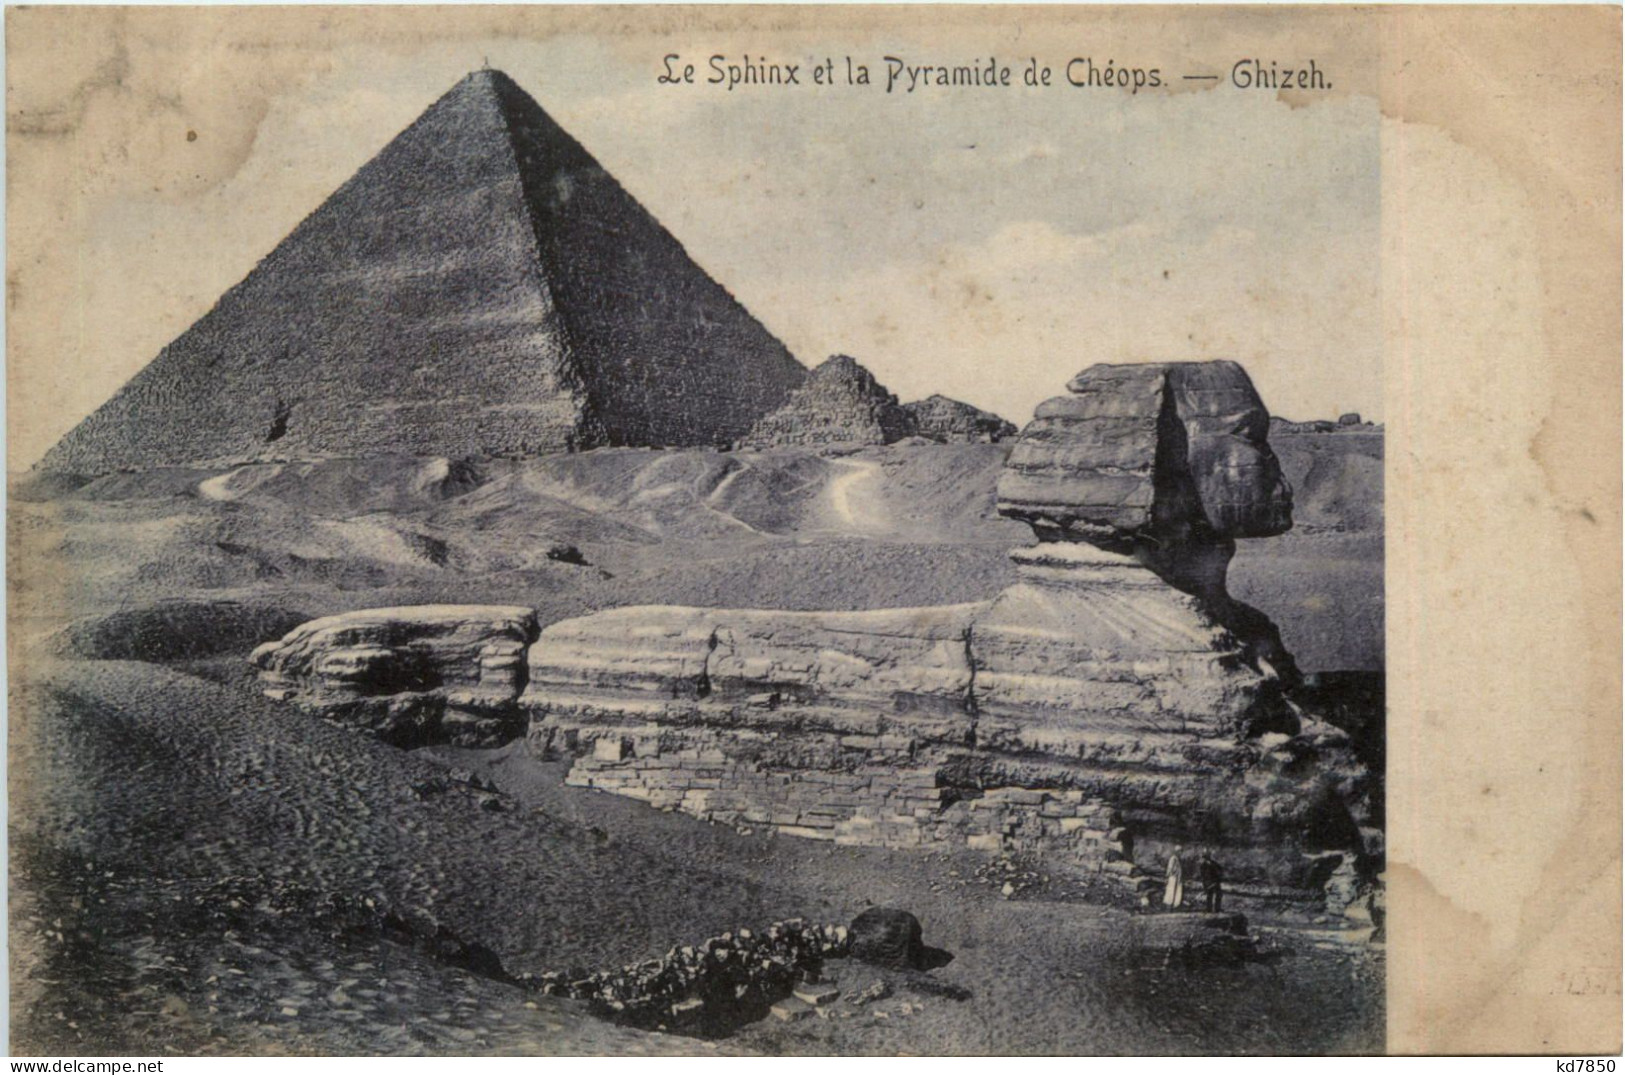 Ghizeh - Le Sphinx - Pyramids